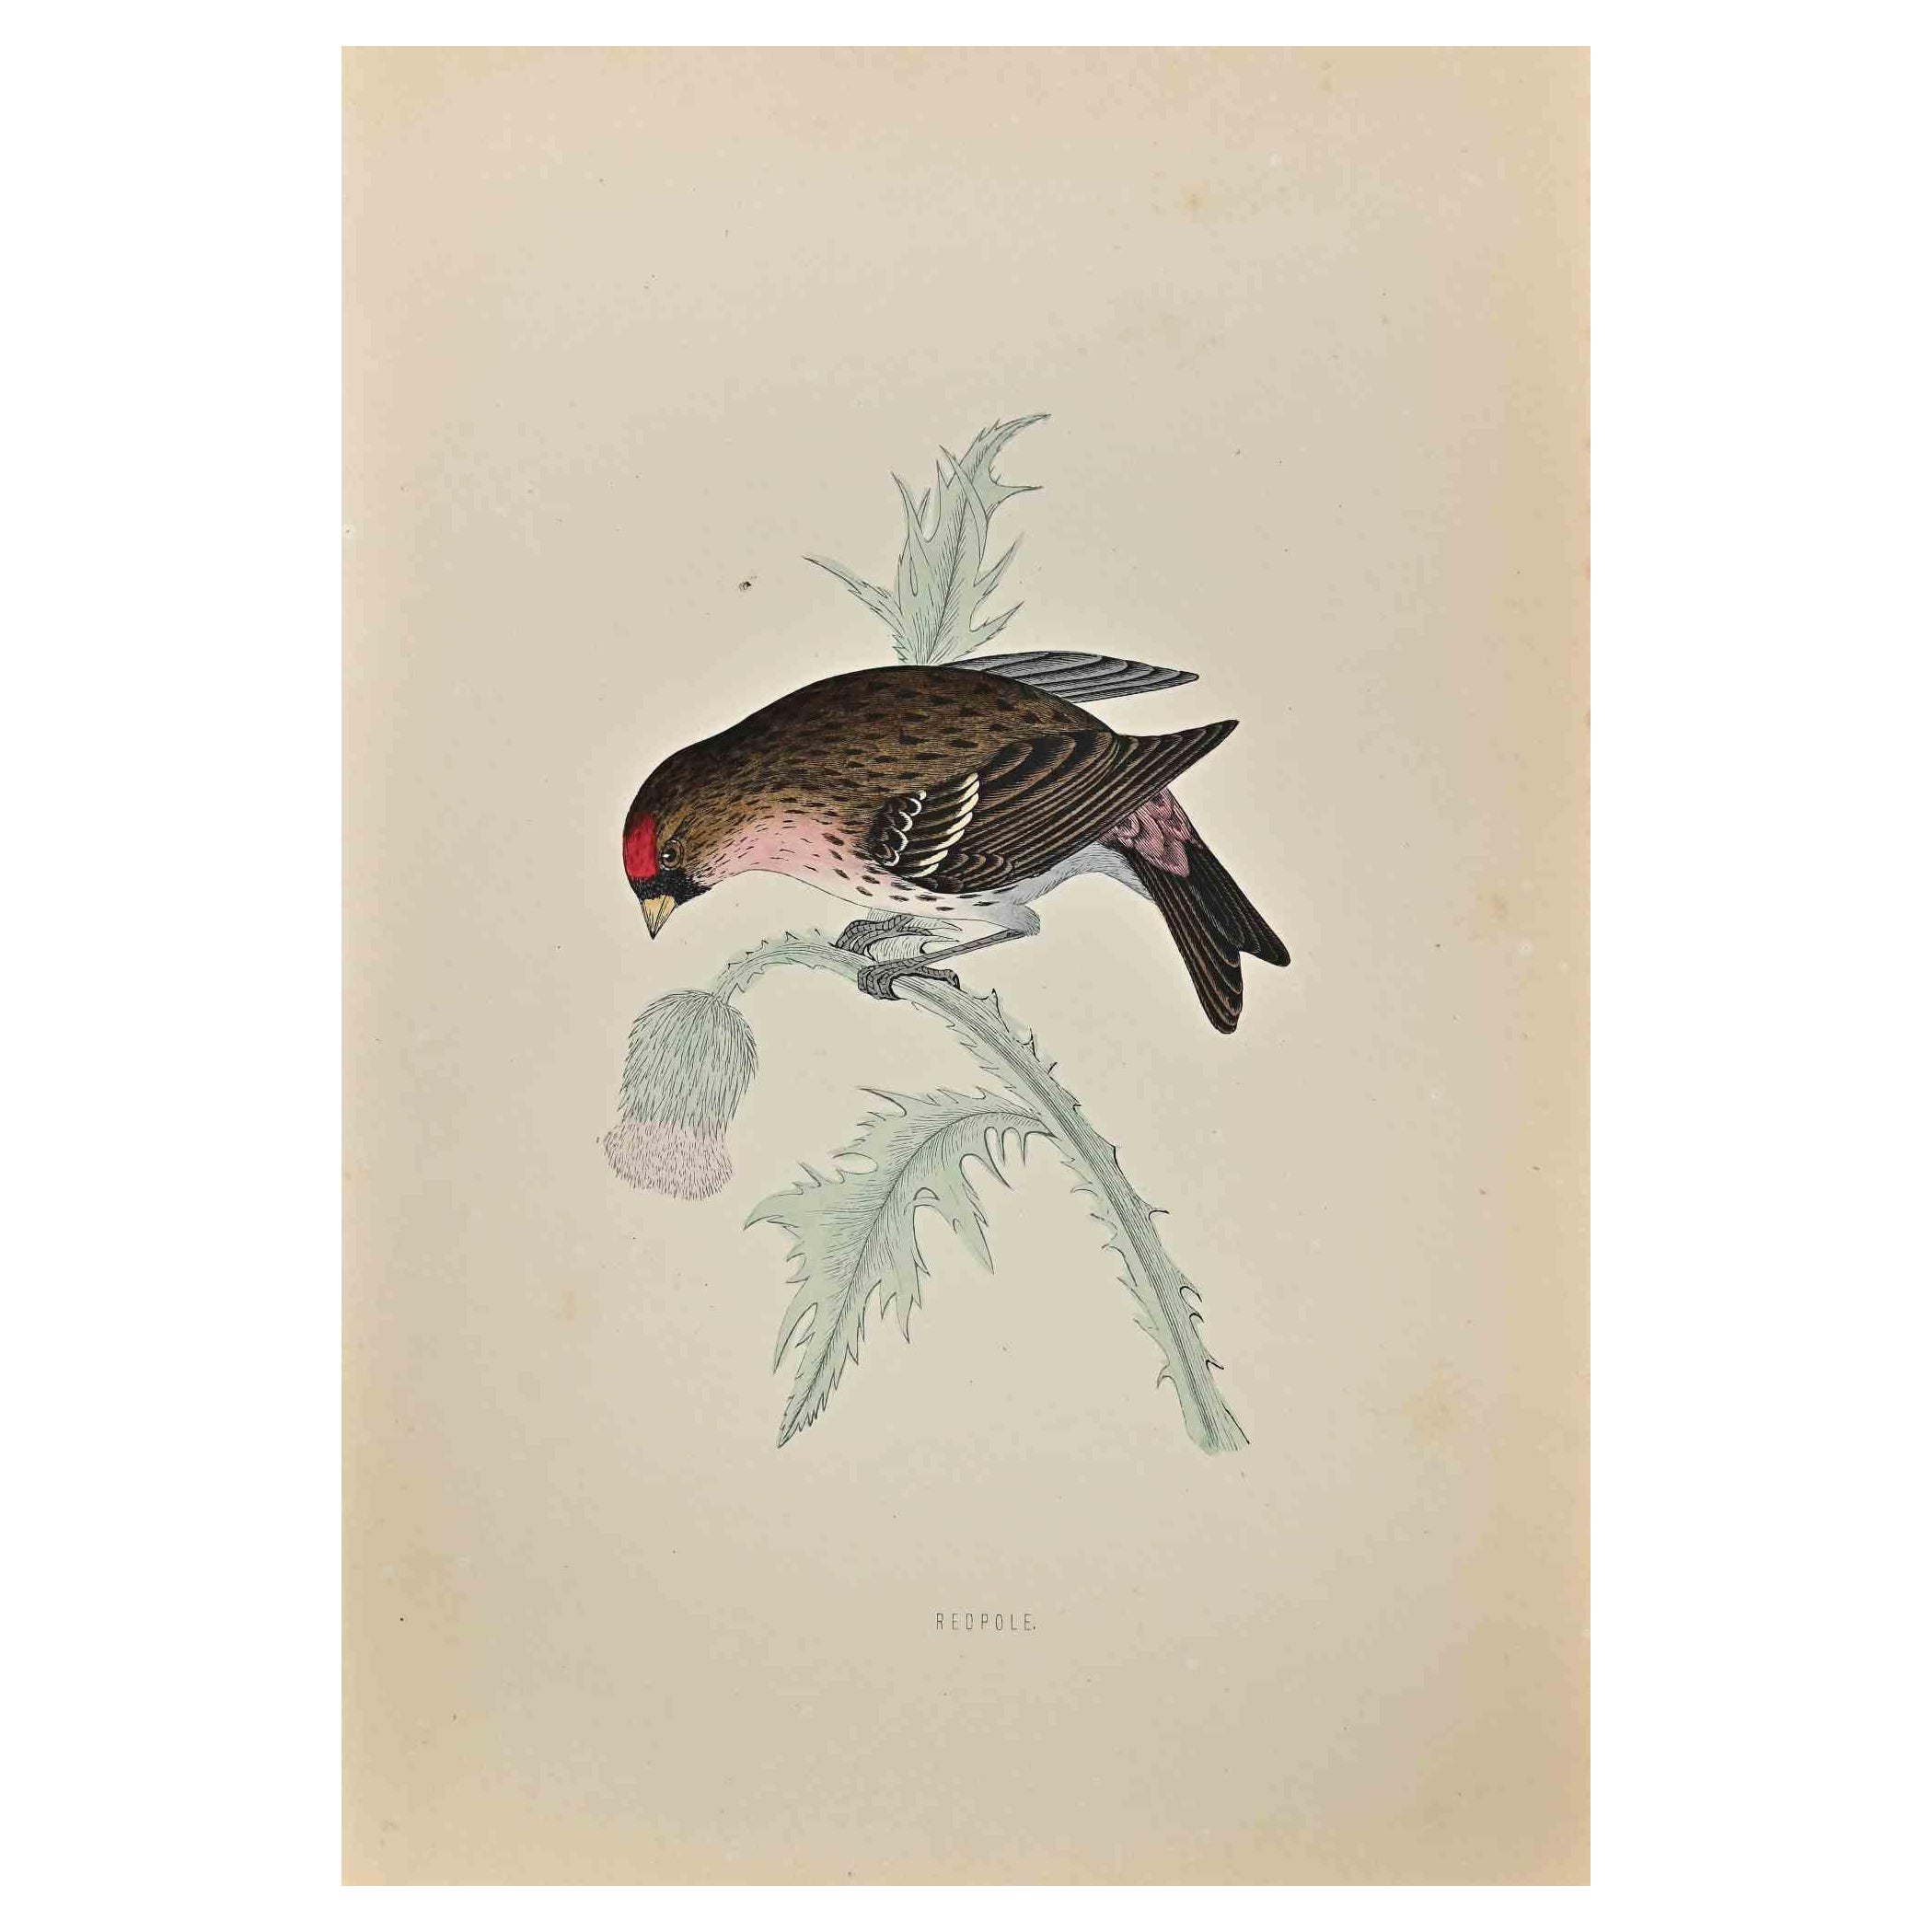 Redpole is a modern artwork realized in 1870 by the British artist Alexander Francis Lydon (1836-1917) . 

Woodcut print, hand colored, published by London, Bell & Sons, 1870.  Name of the bird printed in plate. This work is part of a print suite